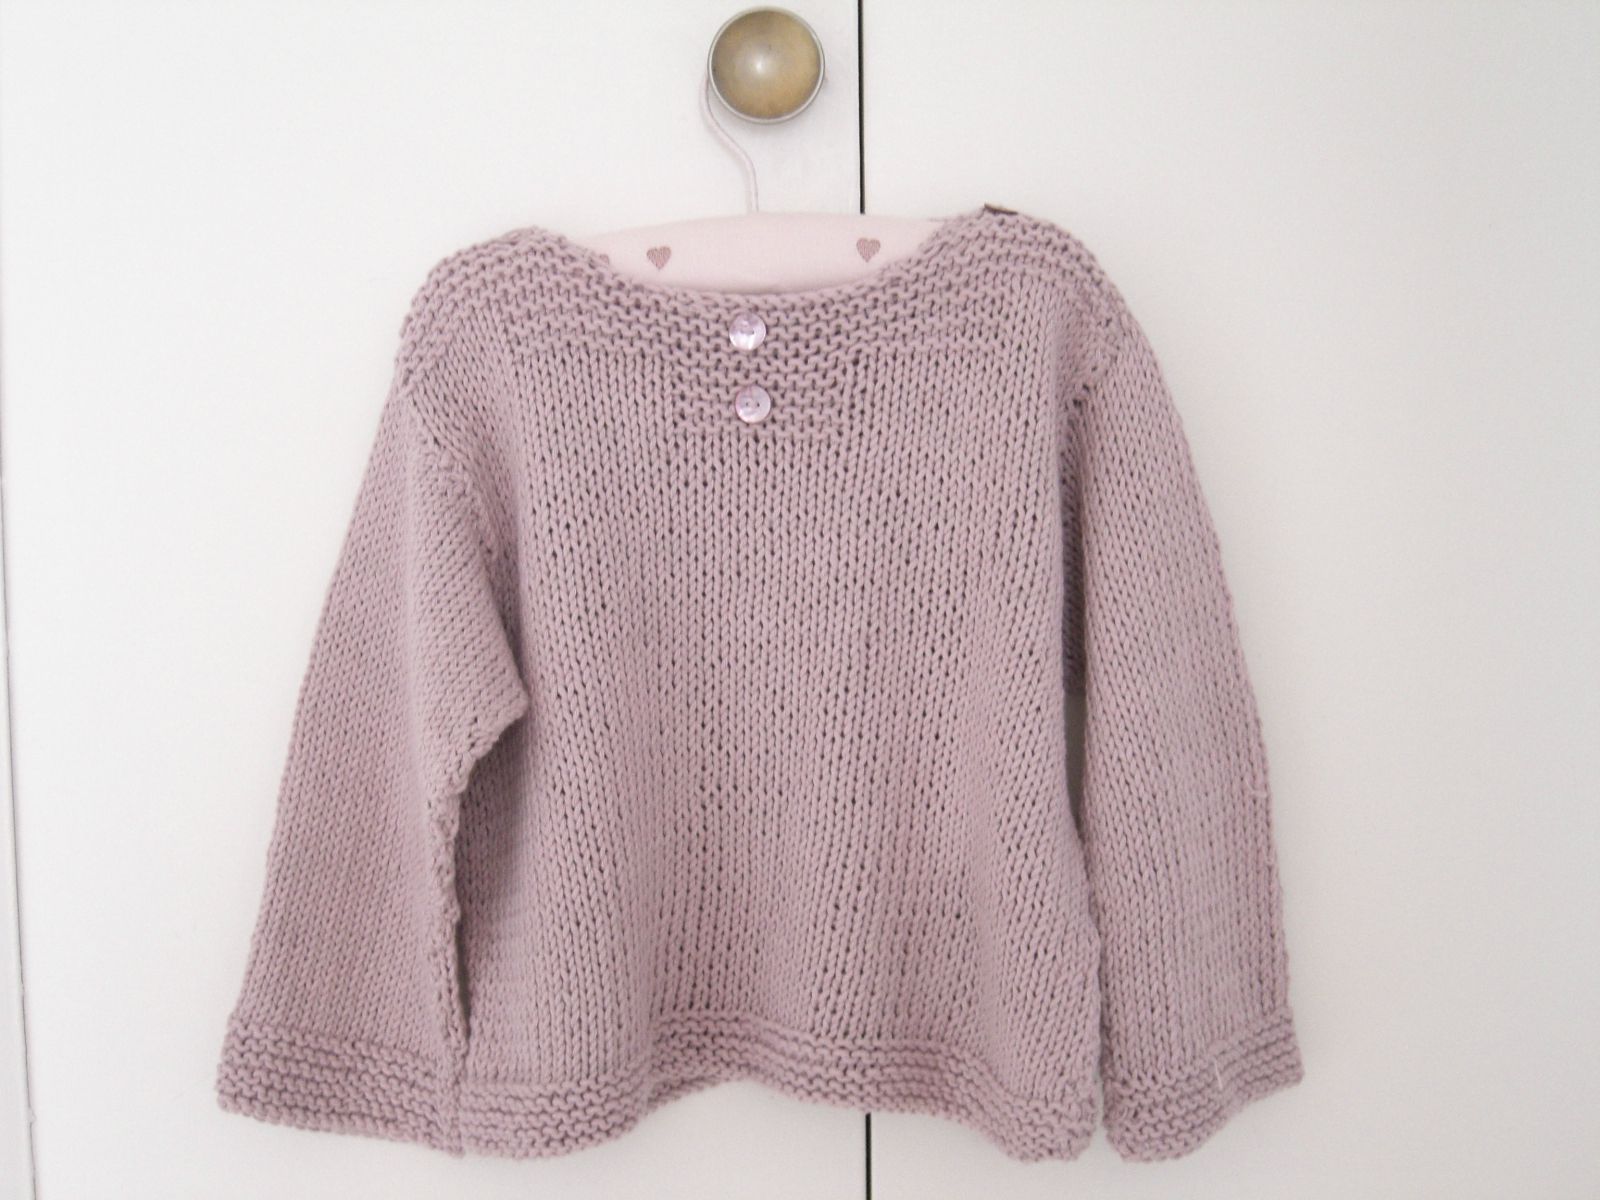 tricoter un pull taille 8 ans